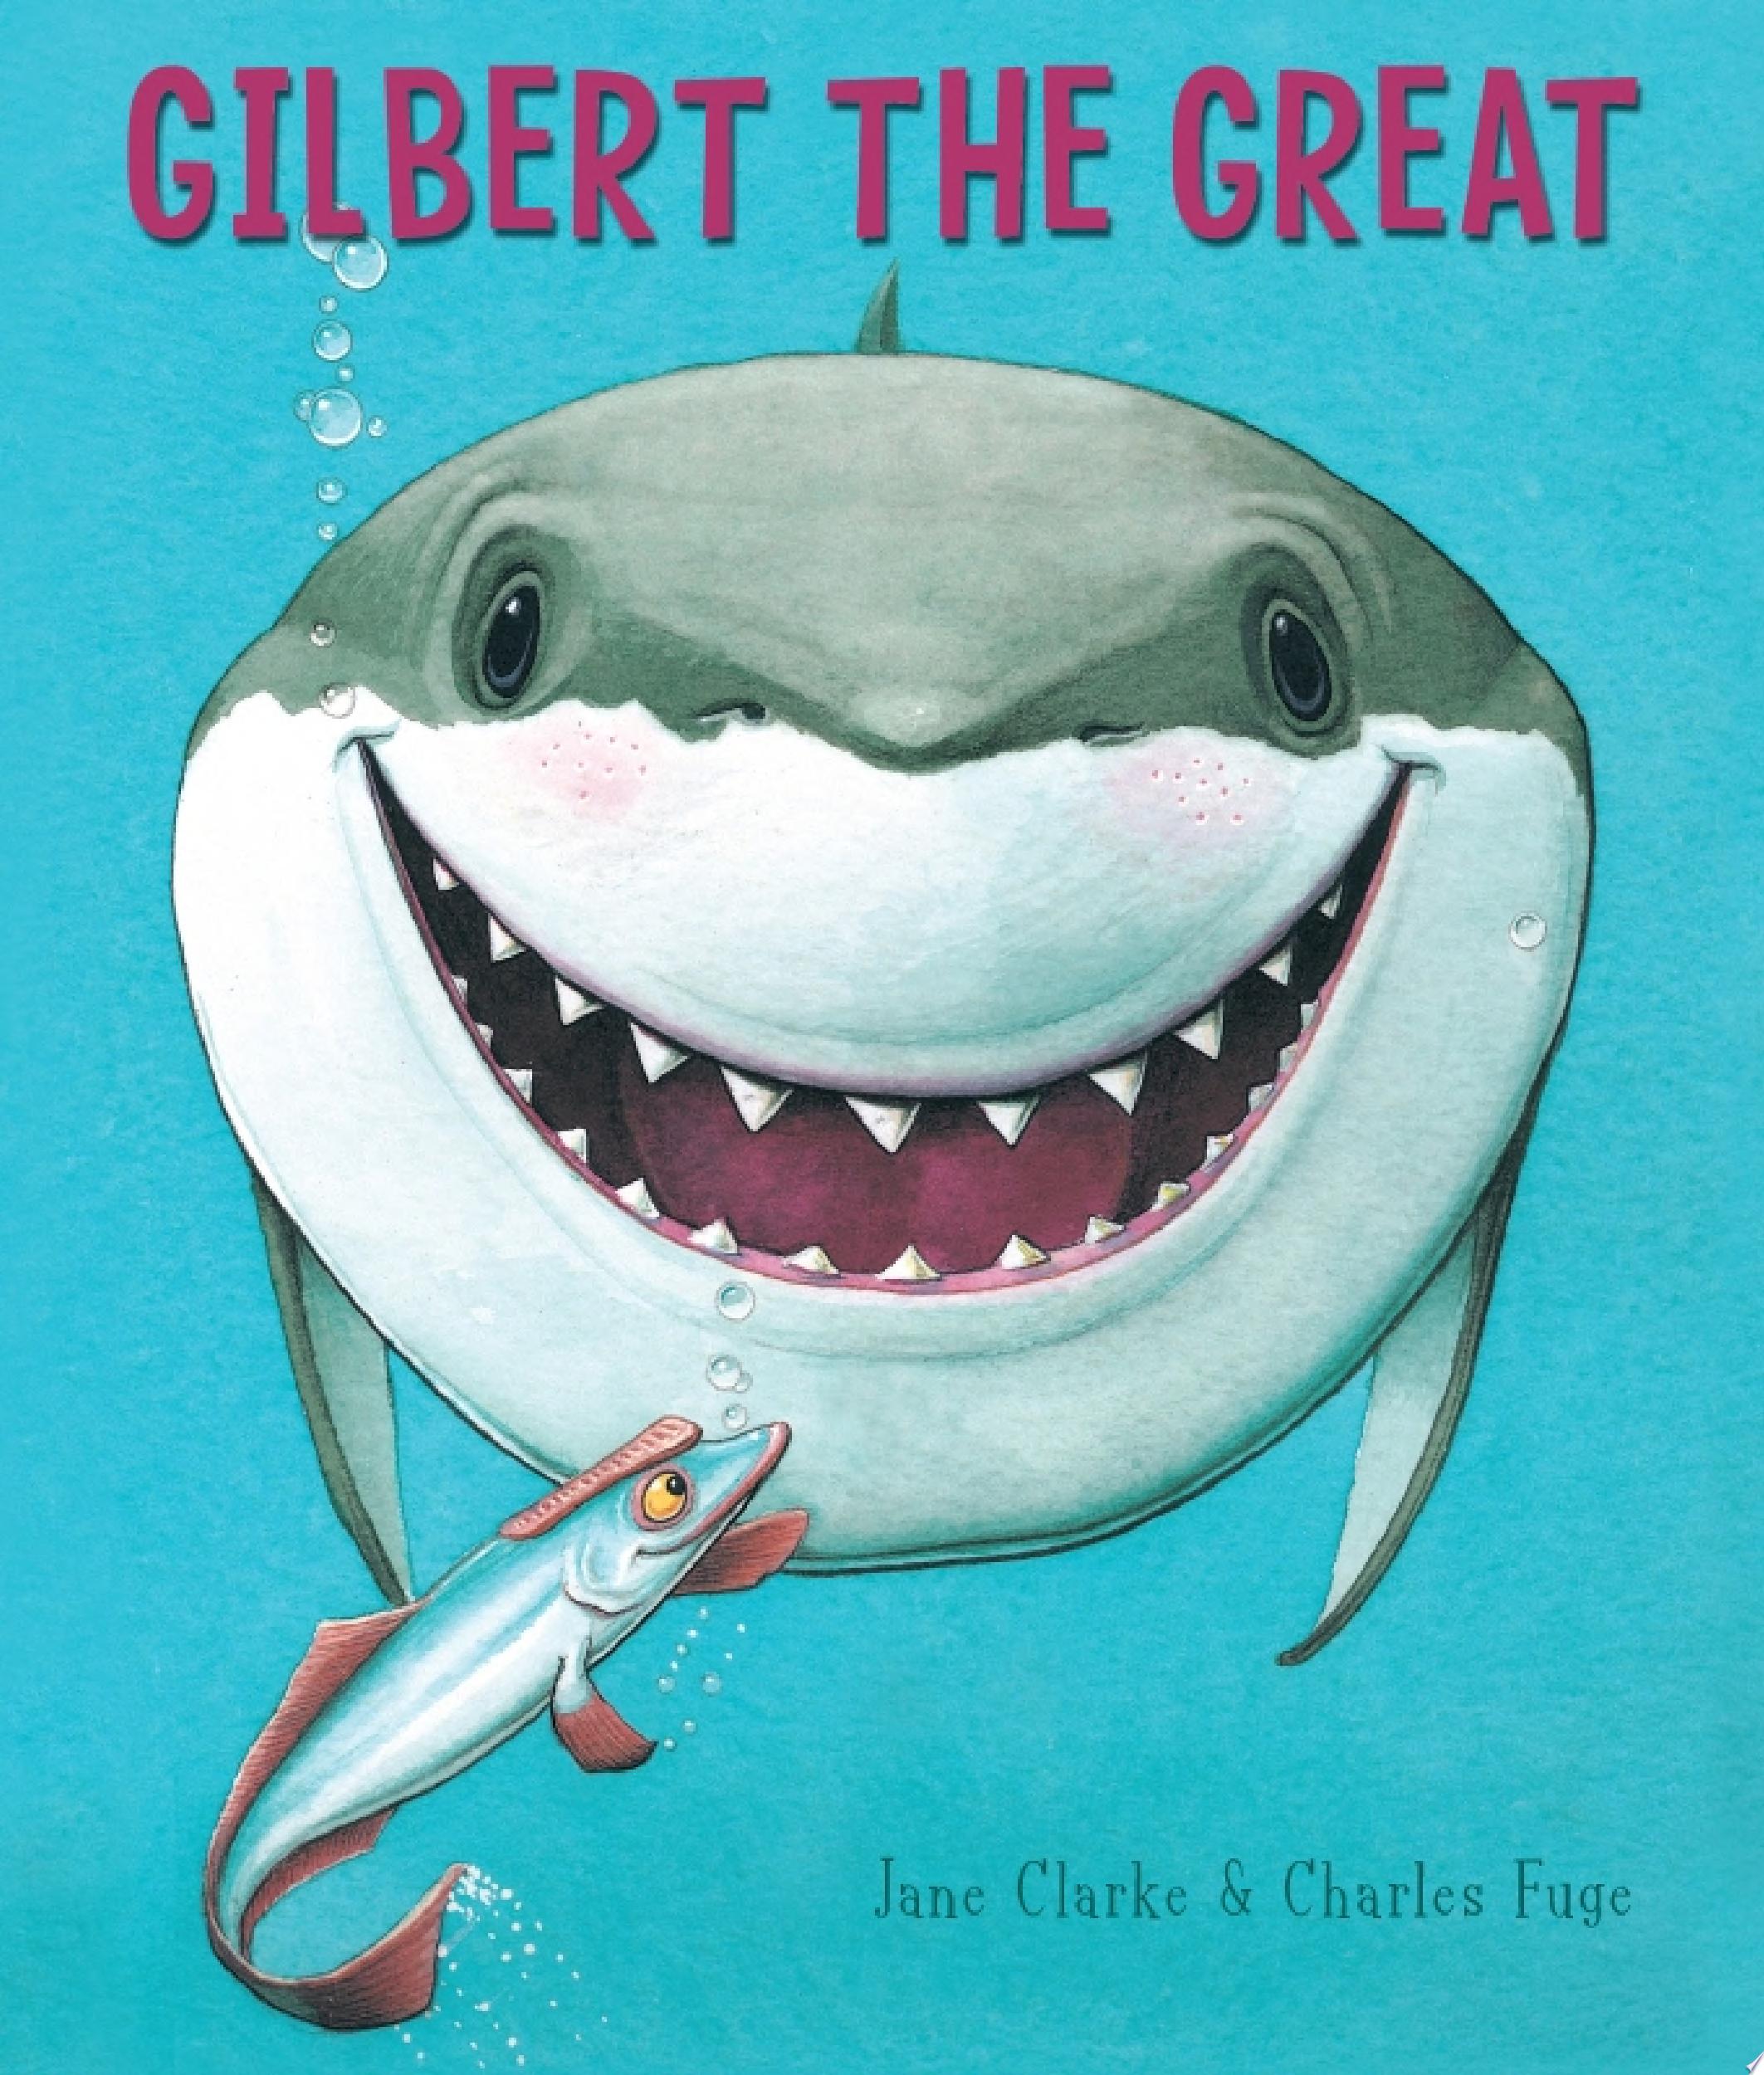 Image for "Gilbert the Great"